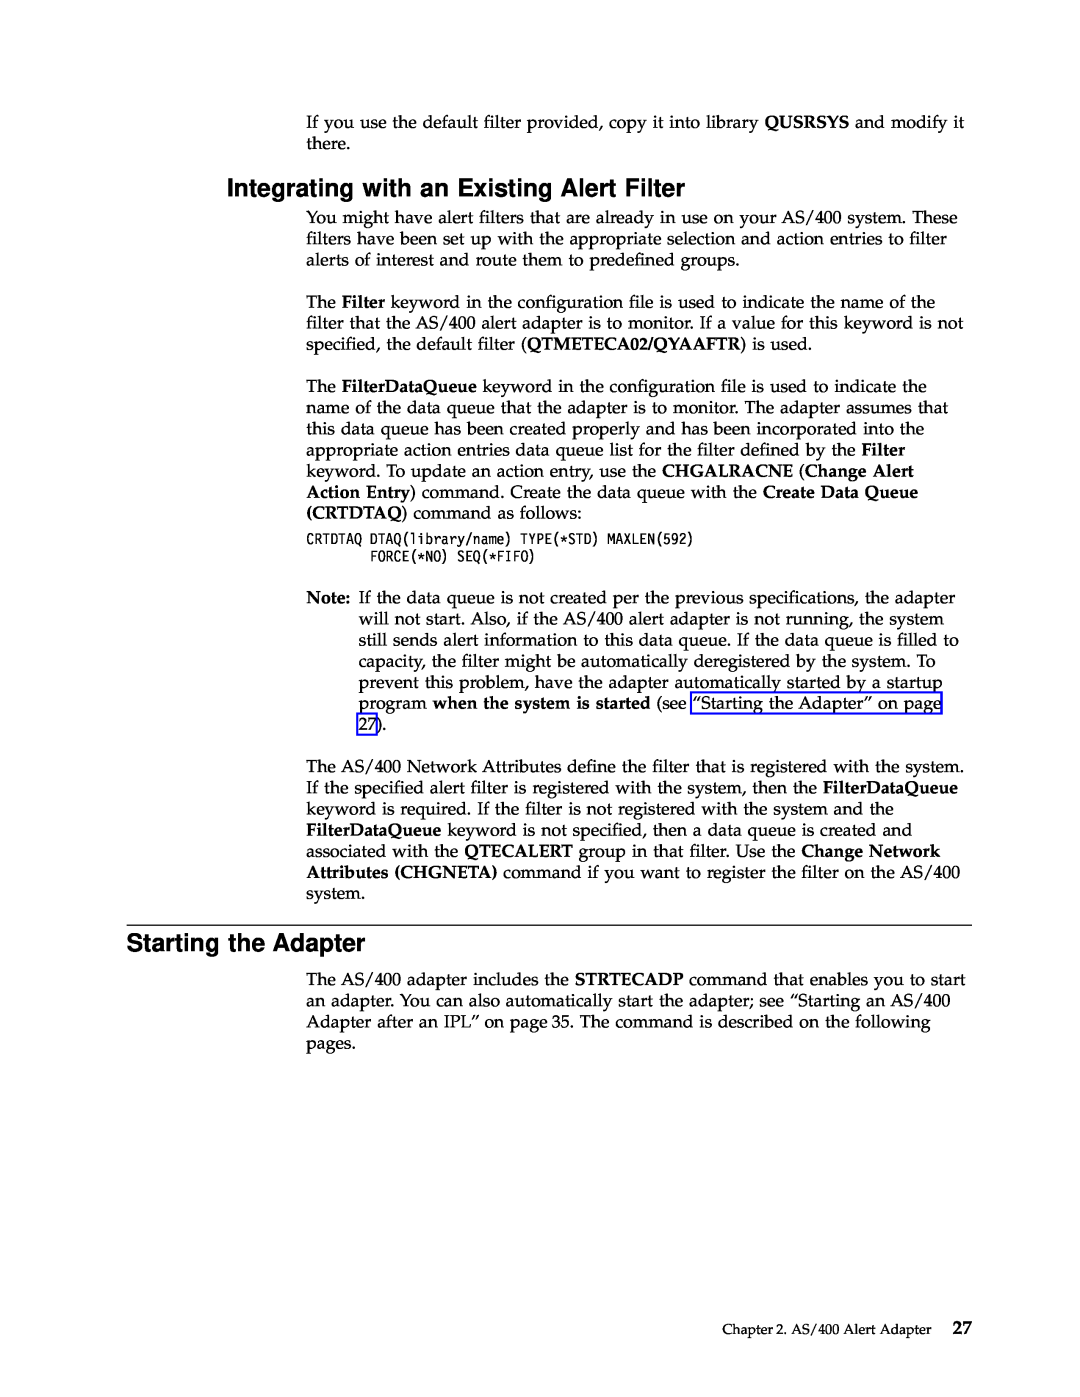 IBM Enterprise Console manual Integrating with an Existing Alert Filter, Starting the Adapter 